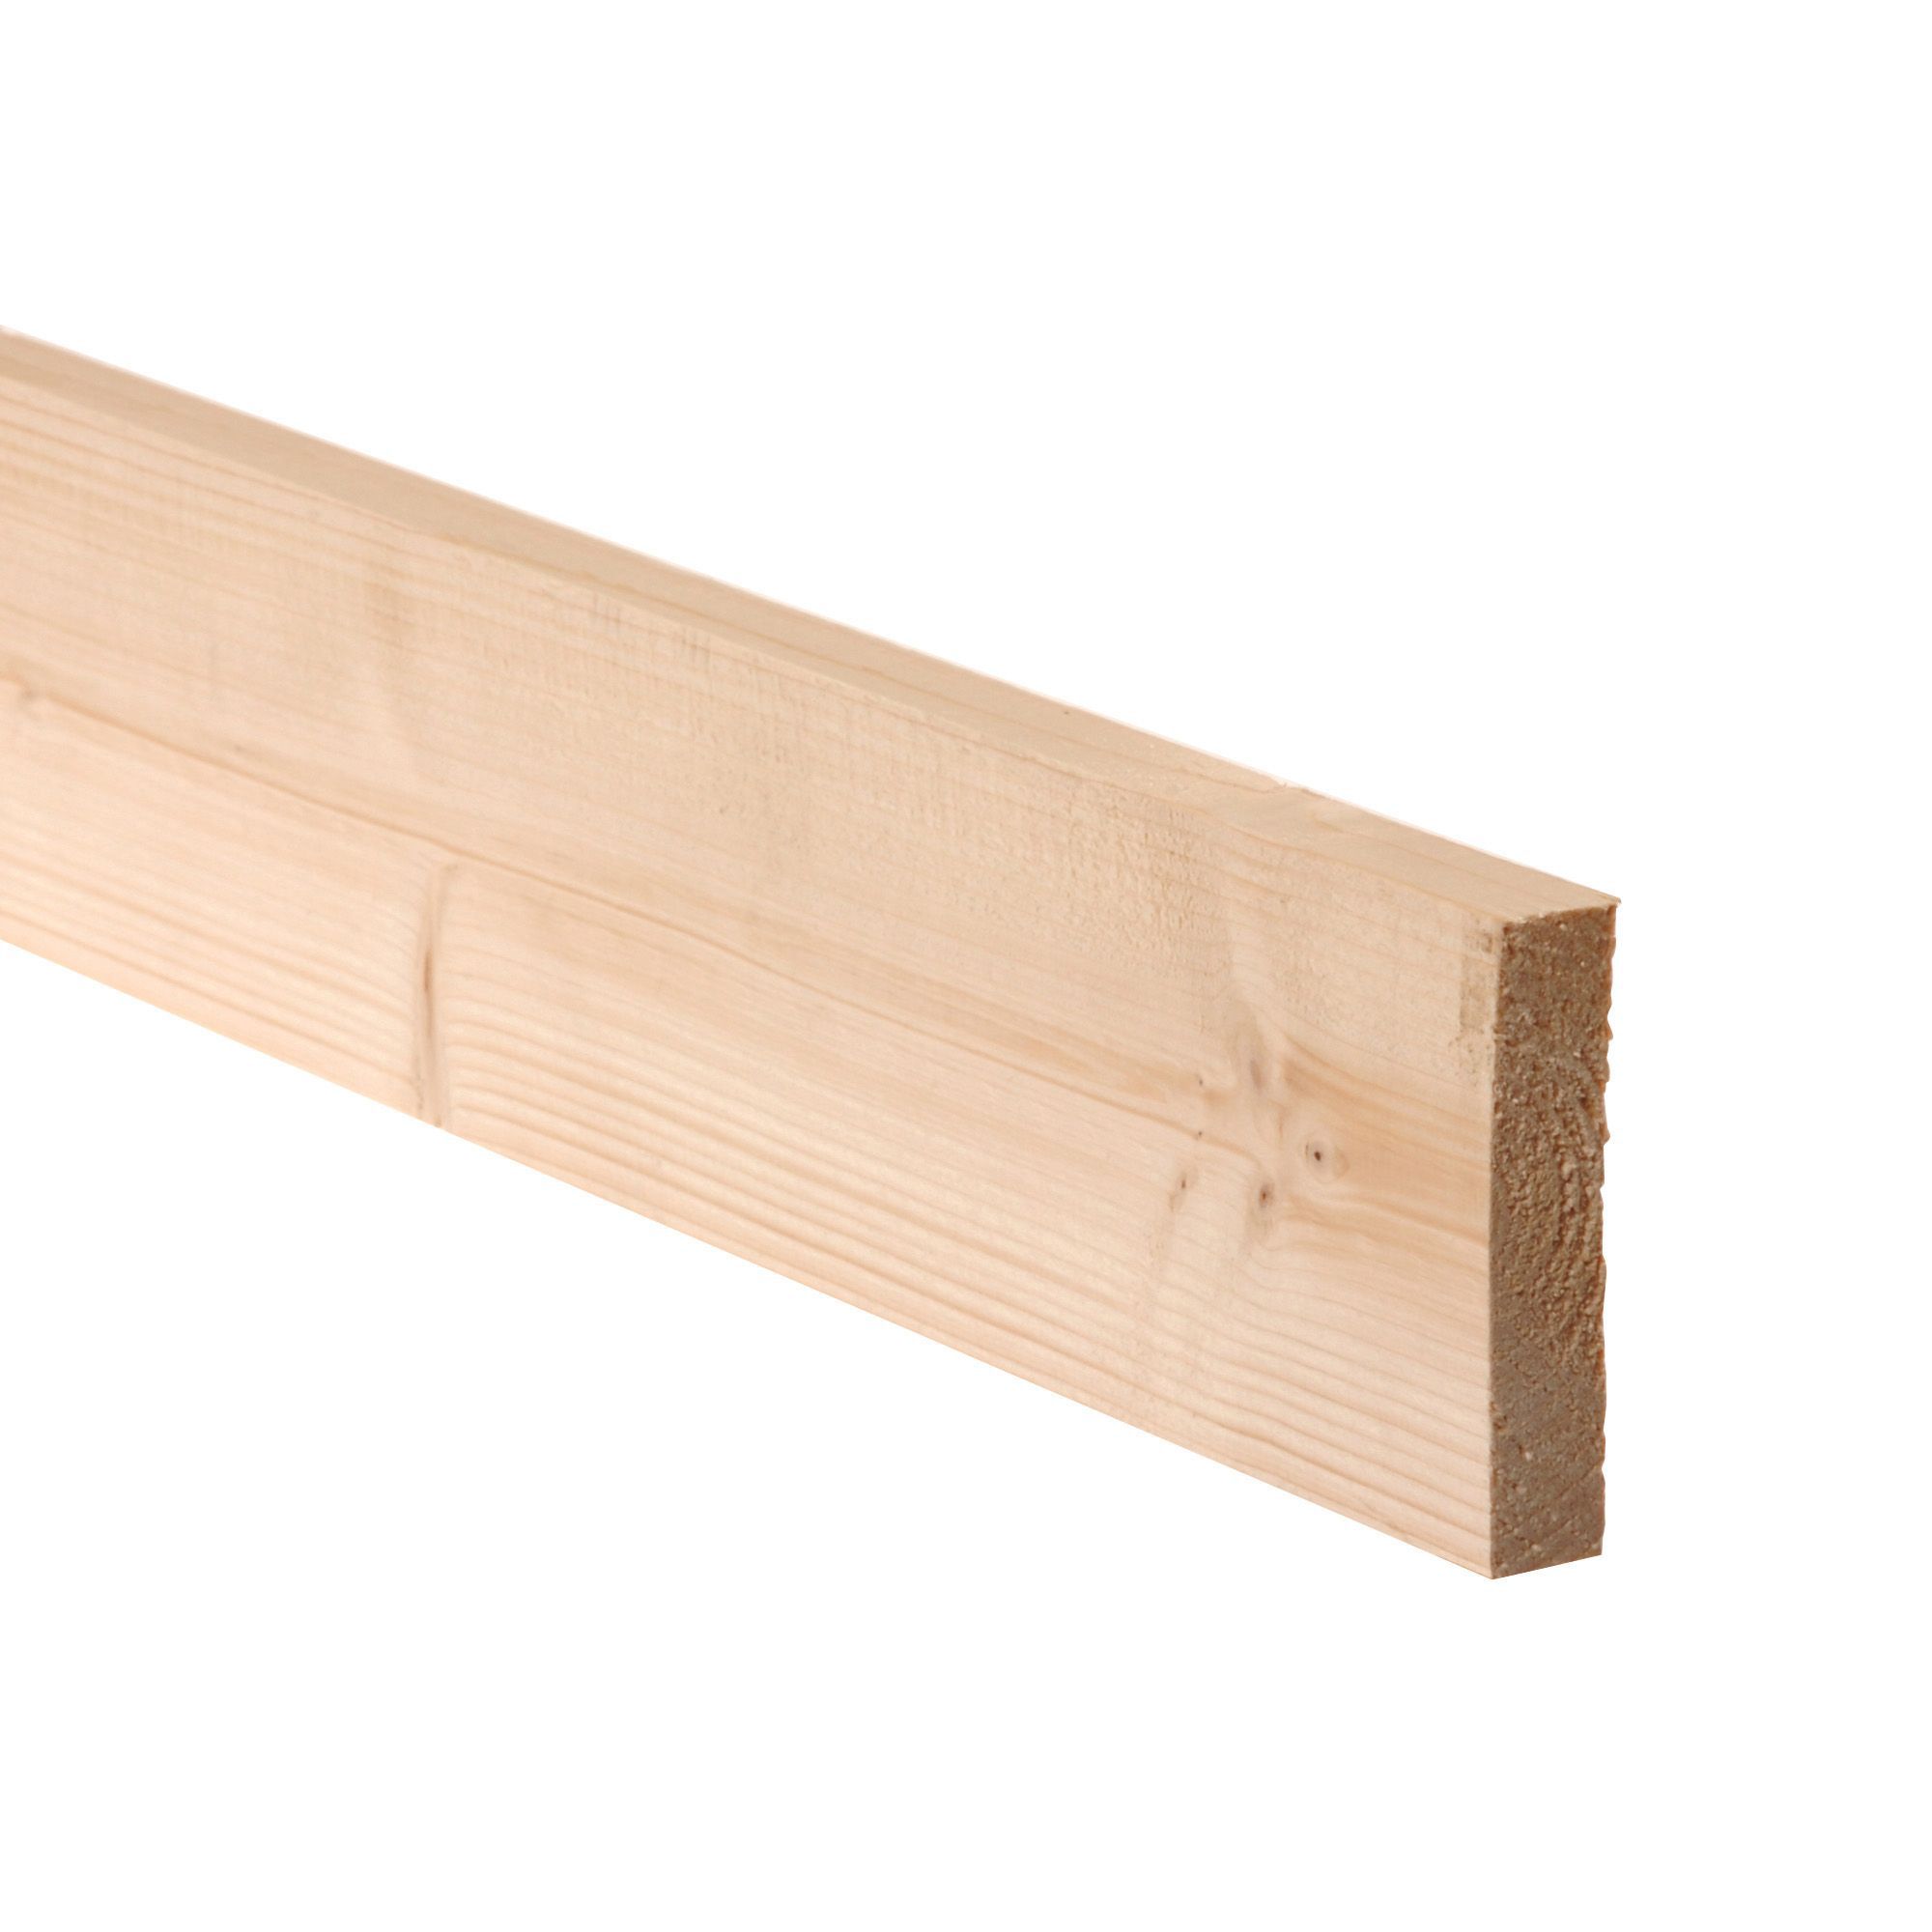 Smooth Planed Square edge Stick timber (L)2.1m (W)131mm (T)28mm, Pack of 6